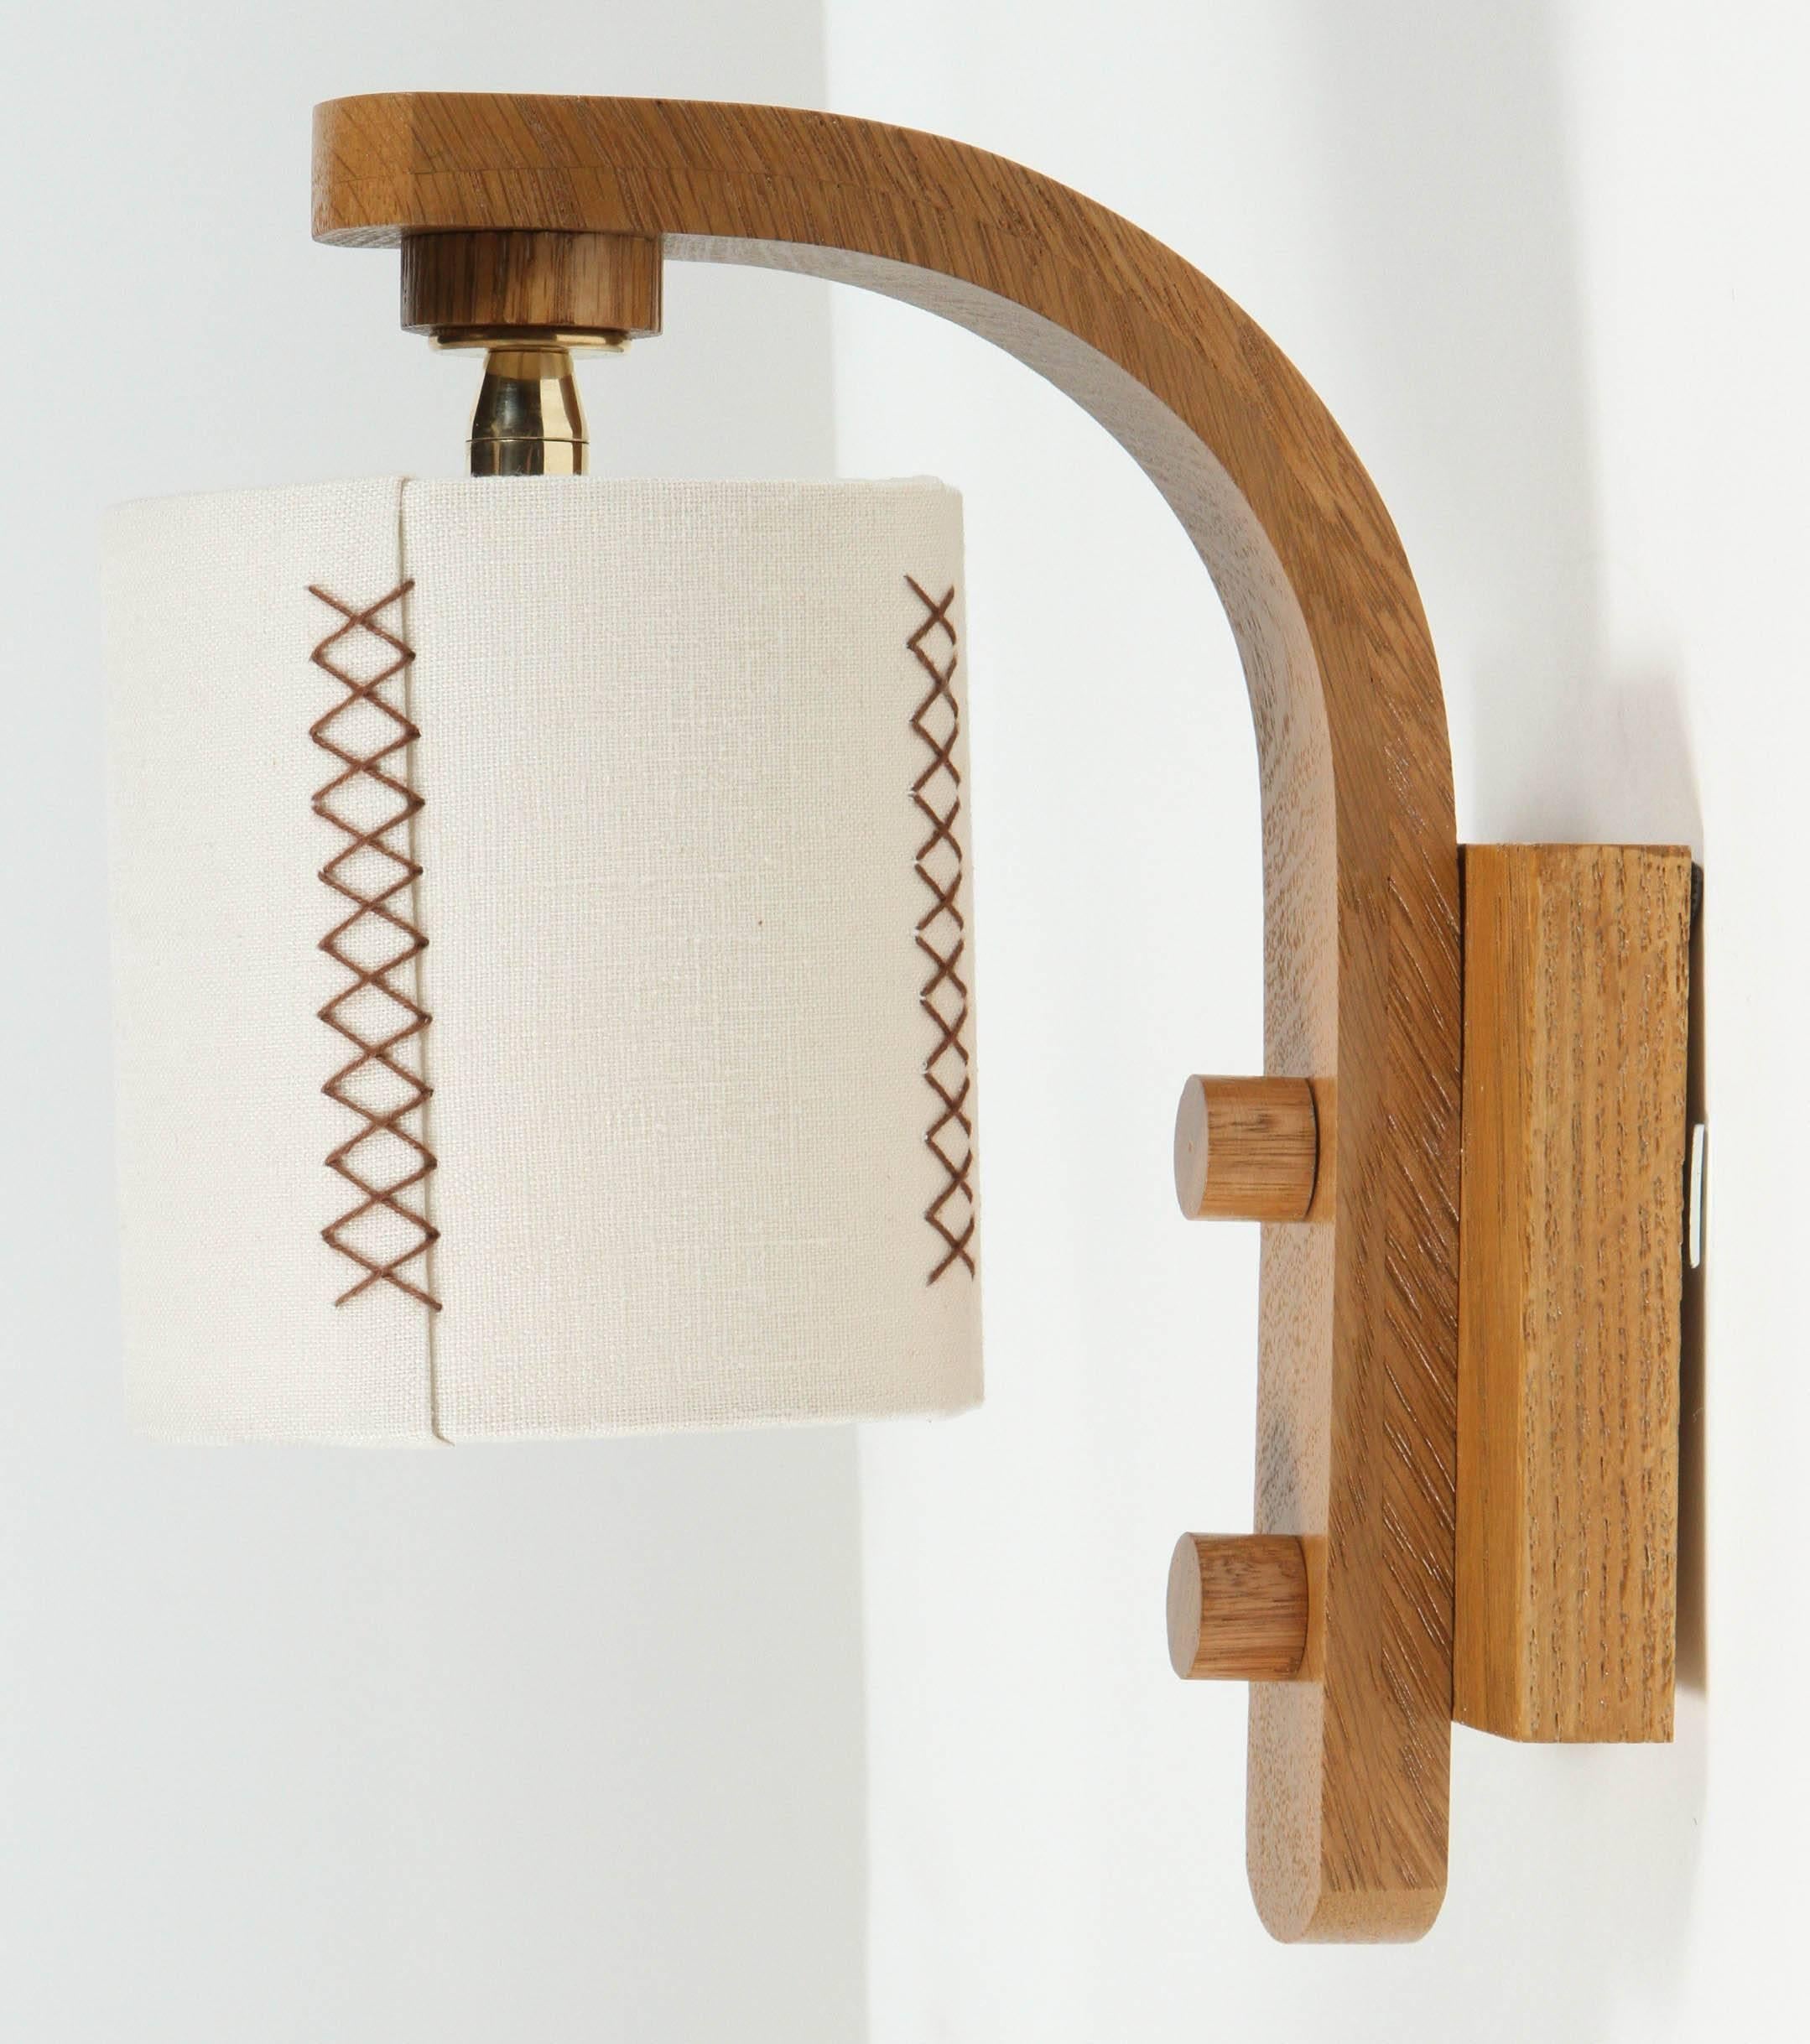 Organic Modern Paul Marra Oak Sconce with Hand-Stitched Linen Shade